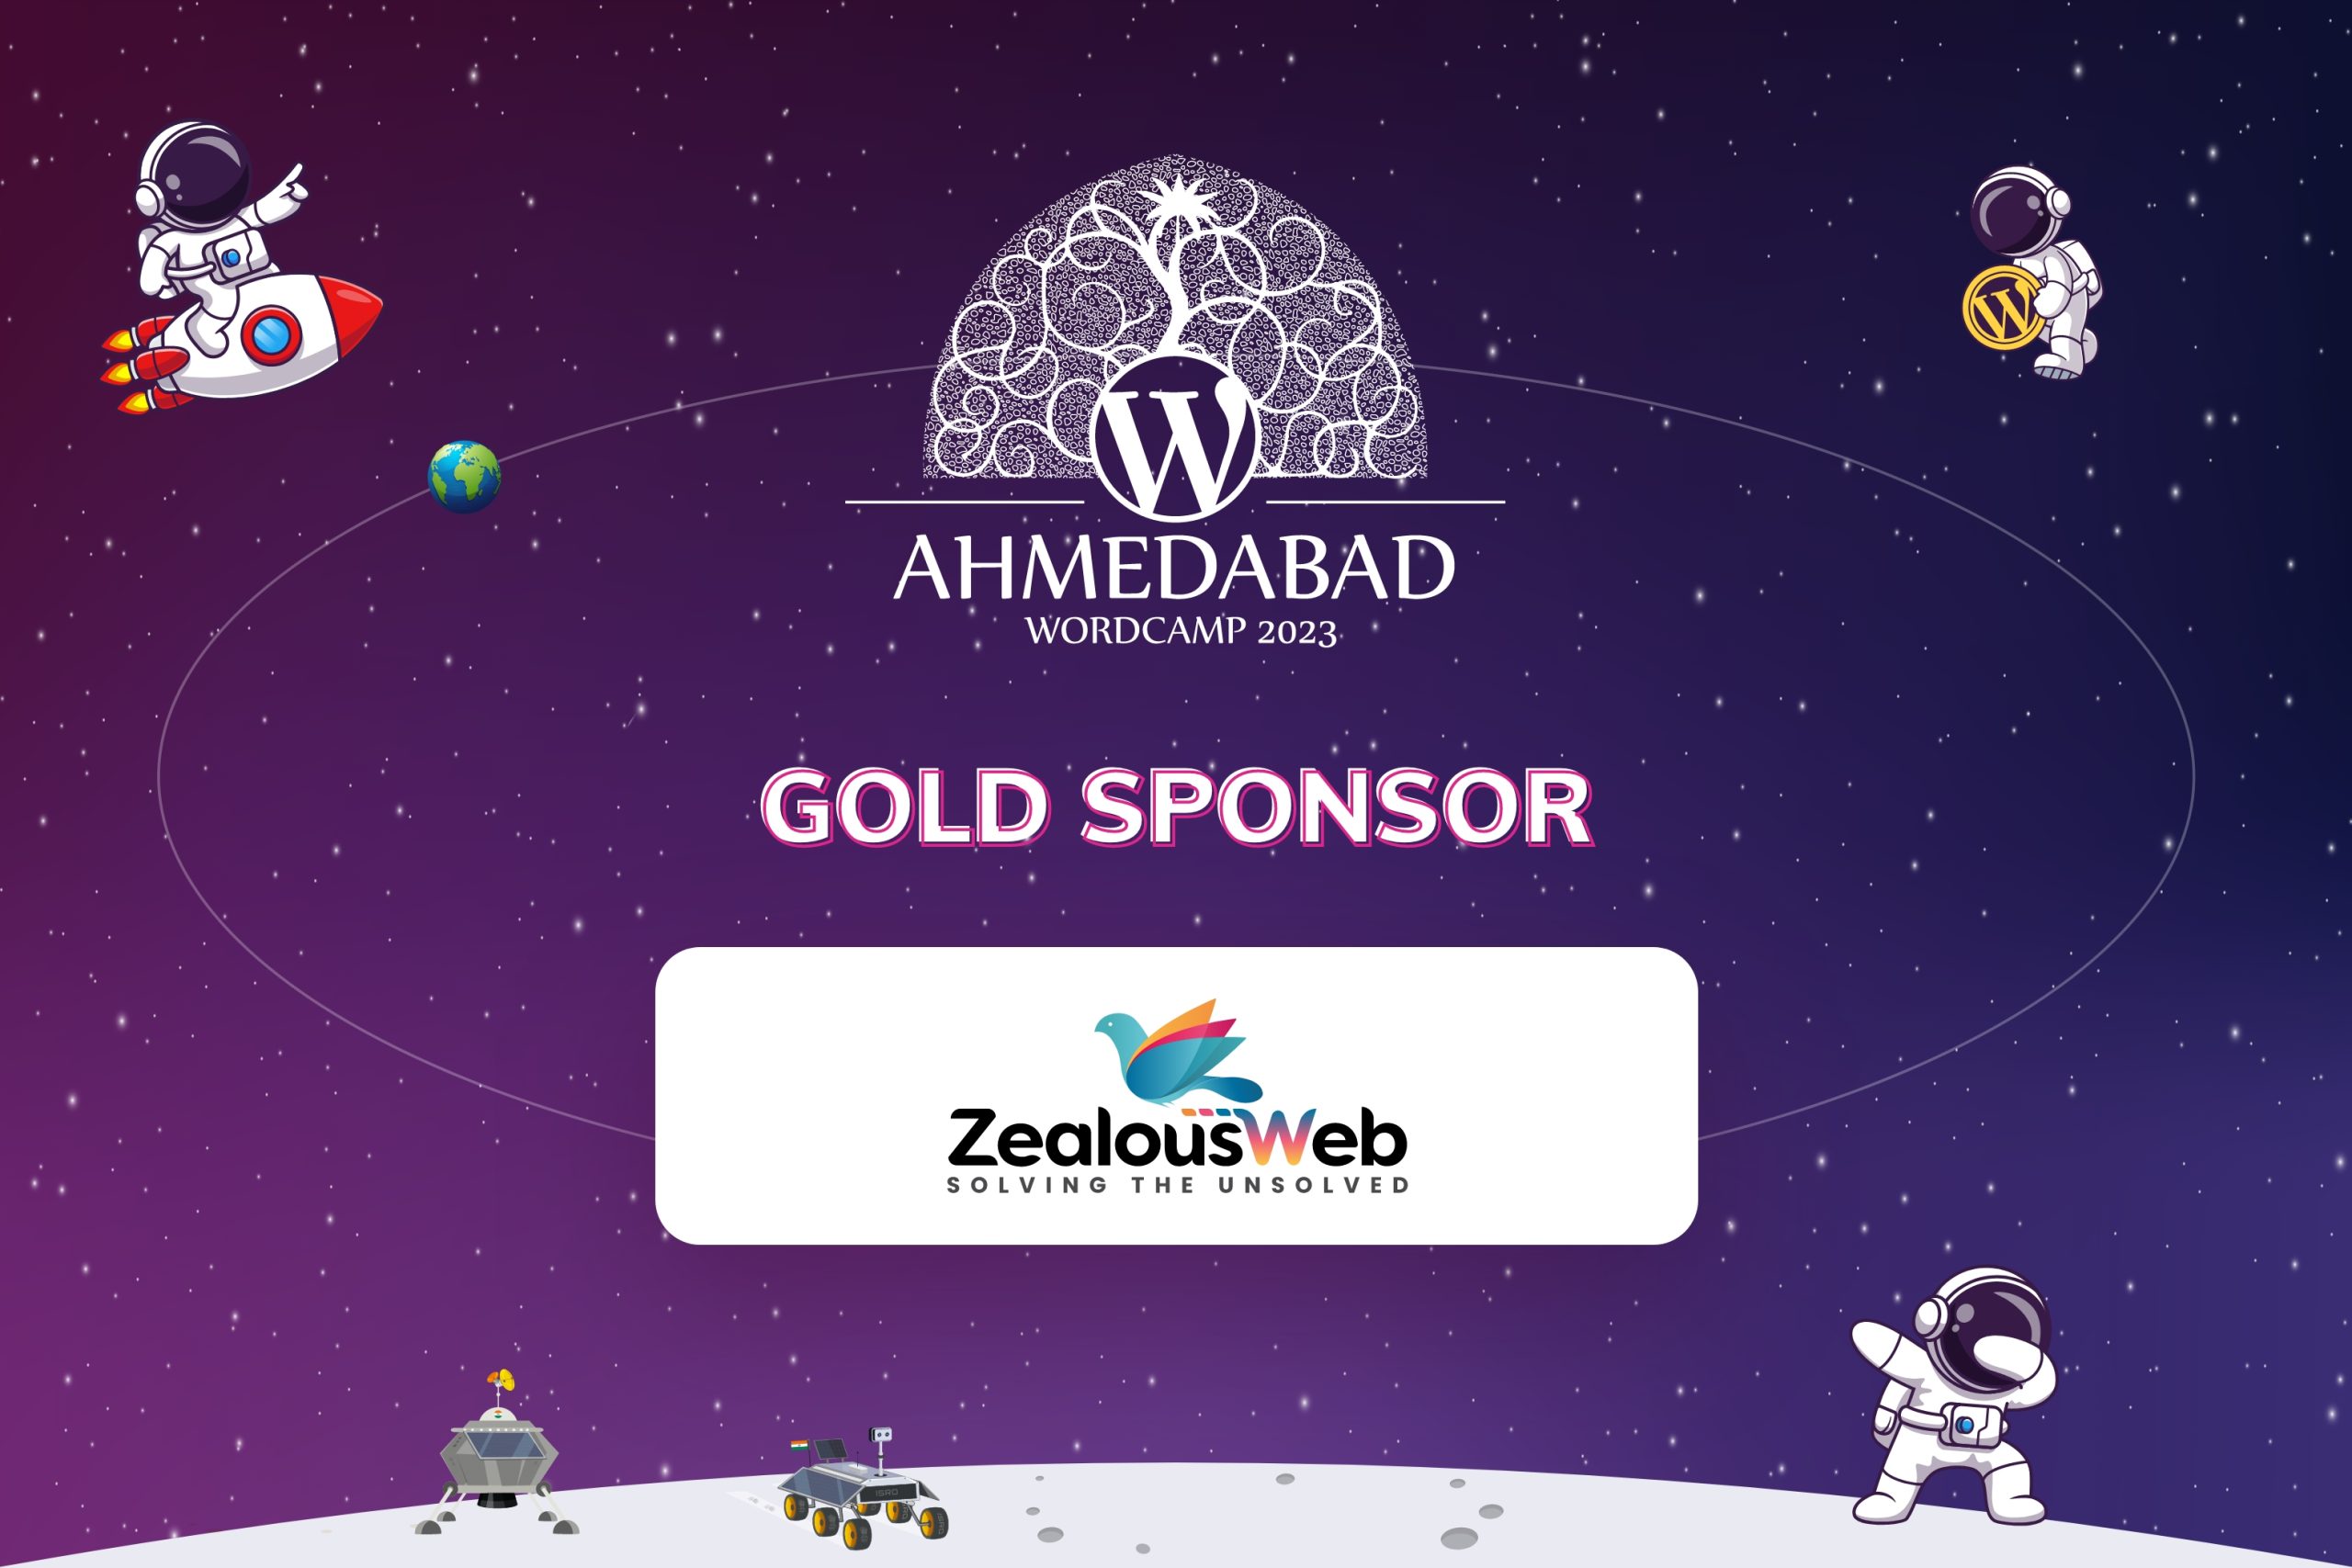 Thank You ZealousWeb, for being our Gold Sponsor 